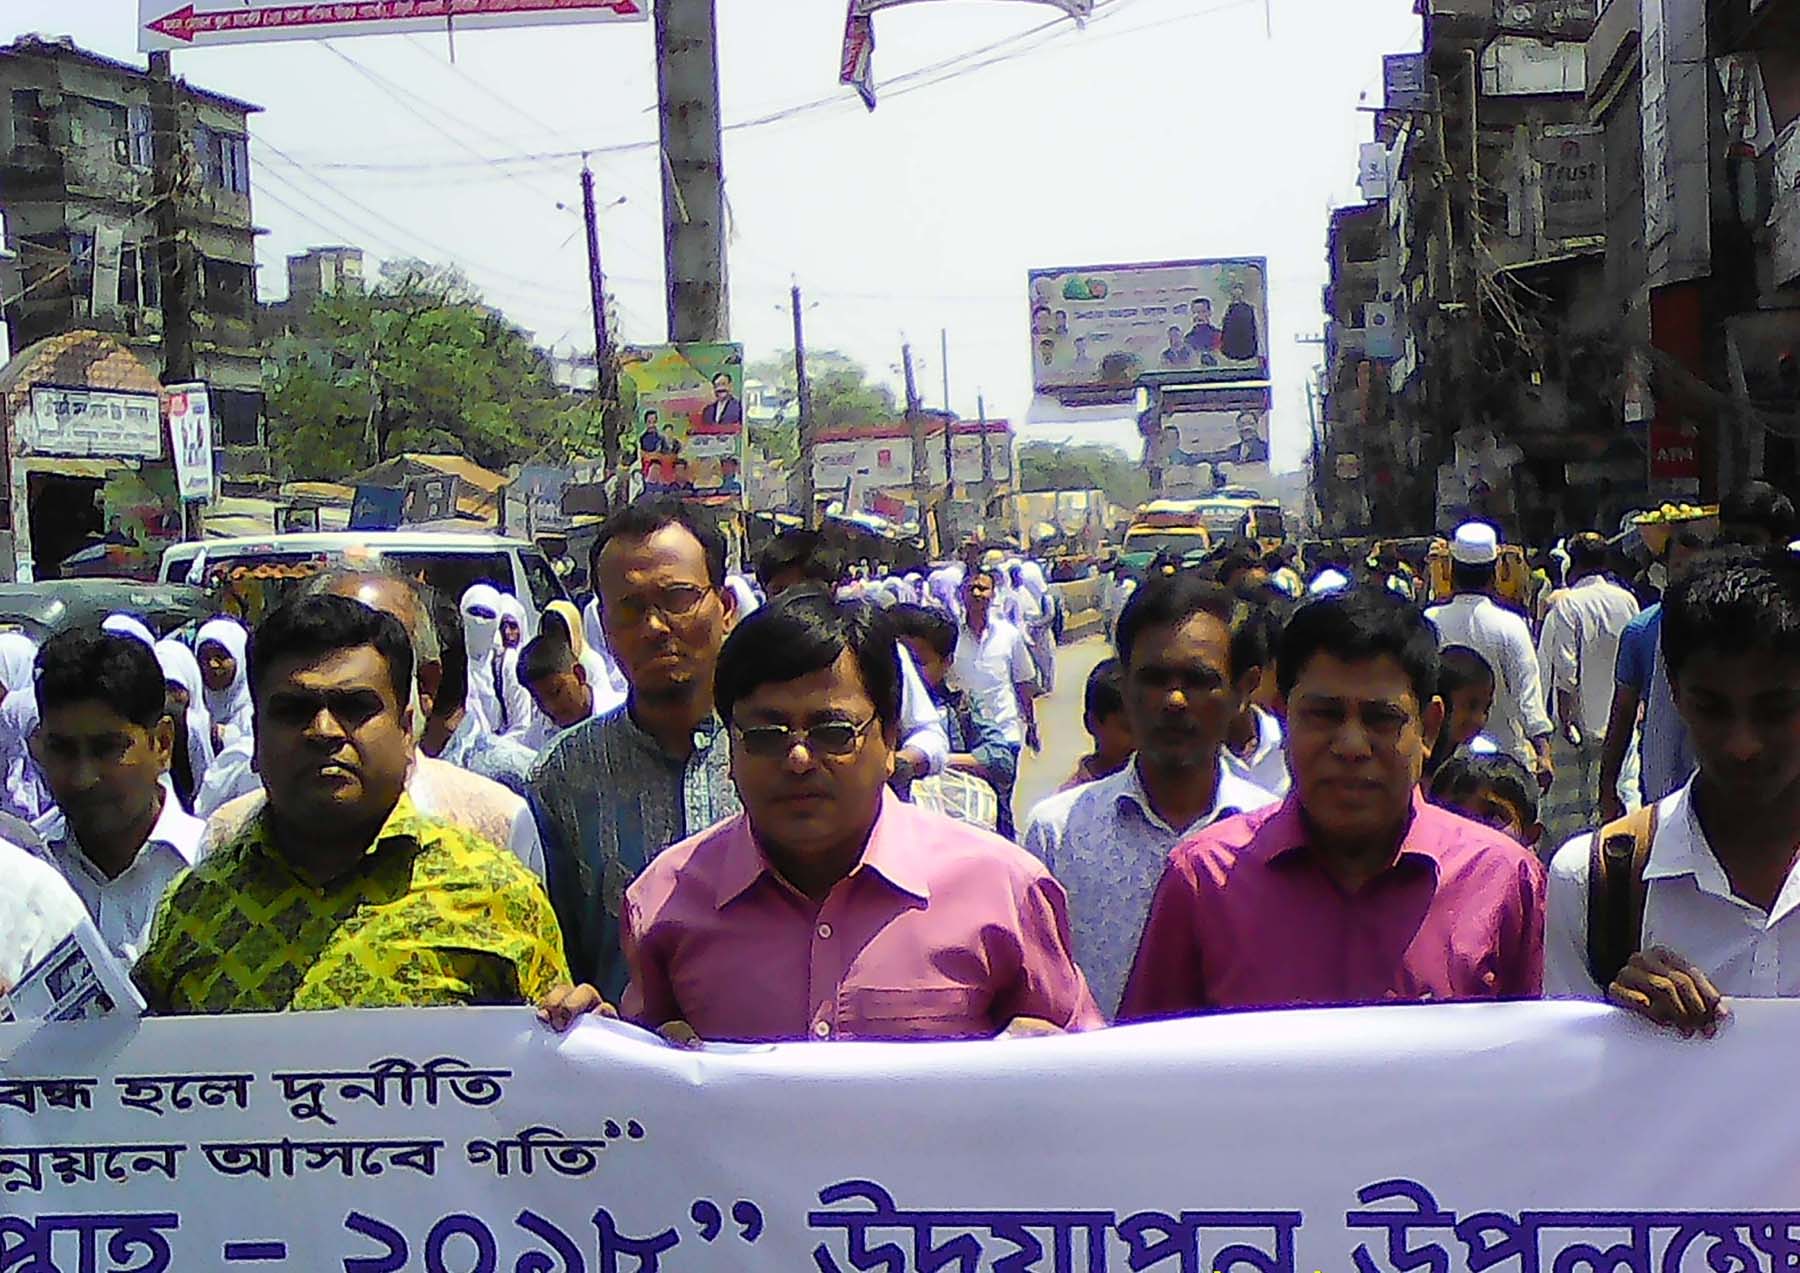 In the picture- Chairman of Begamganj-Sonaimuri Shikkha O Sastha Unnayan Foundation and Begumganj Technical and Computer Institute Principal Gias Uddin Mithu including chaumuhani S.A. College Principal Md. Omar Faruk, English Department Lecturer Monir Hossain participated in rally on the occasion of Anti-Corruption Week 2018.